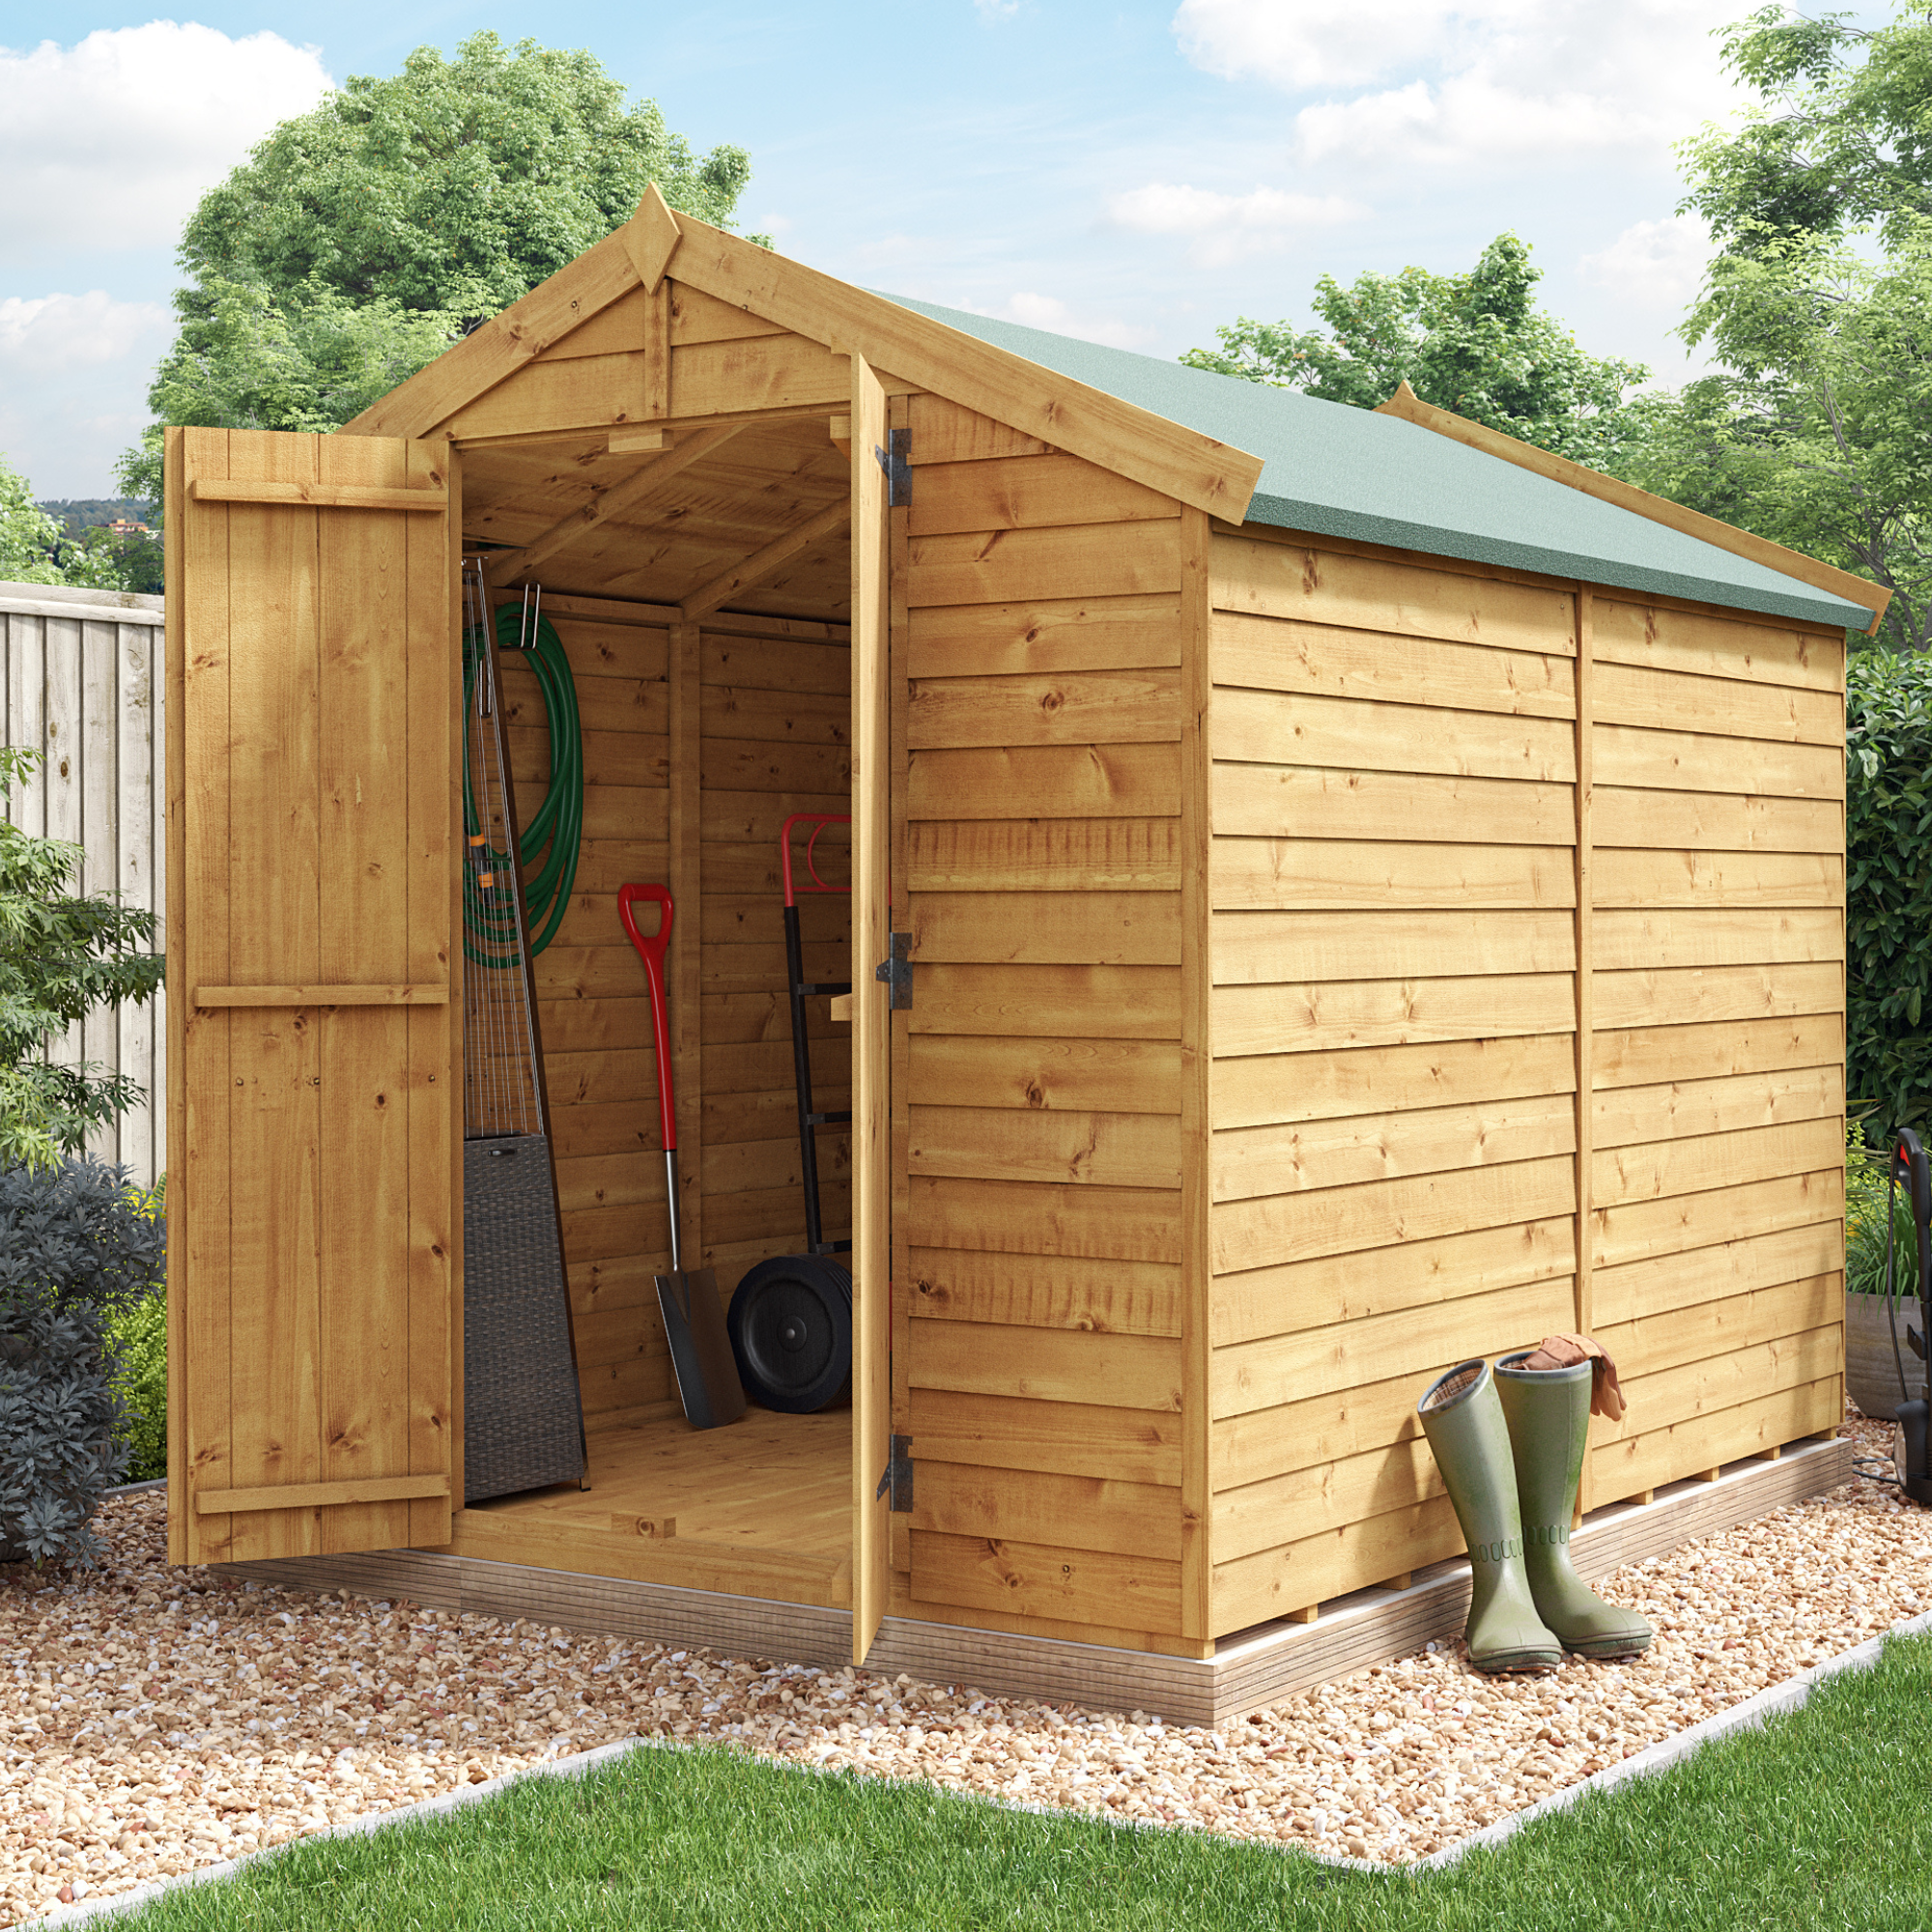 8 x 6 Pressure Treated Shed - BillyOh Keeper Overlap Apex Wooden Shed - Windowless 8x6ft Garden Shed